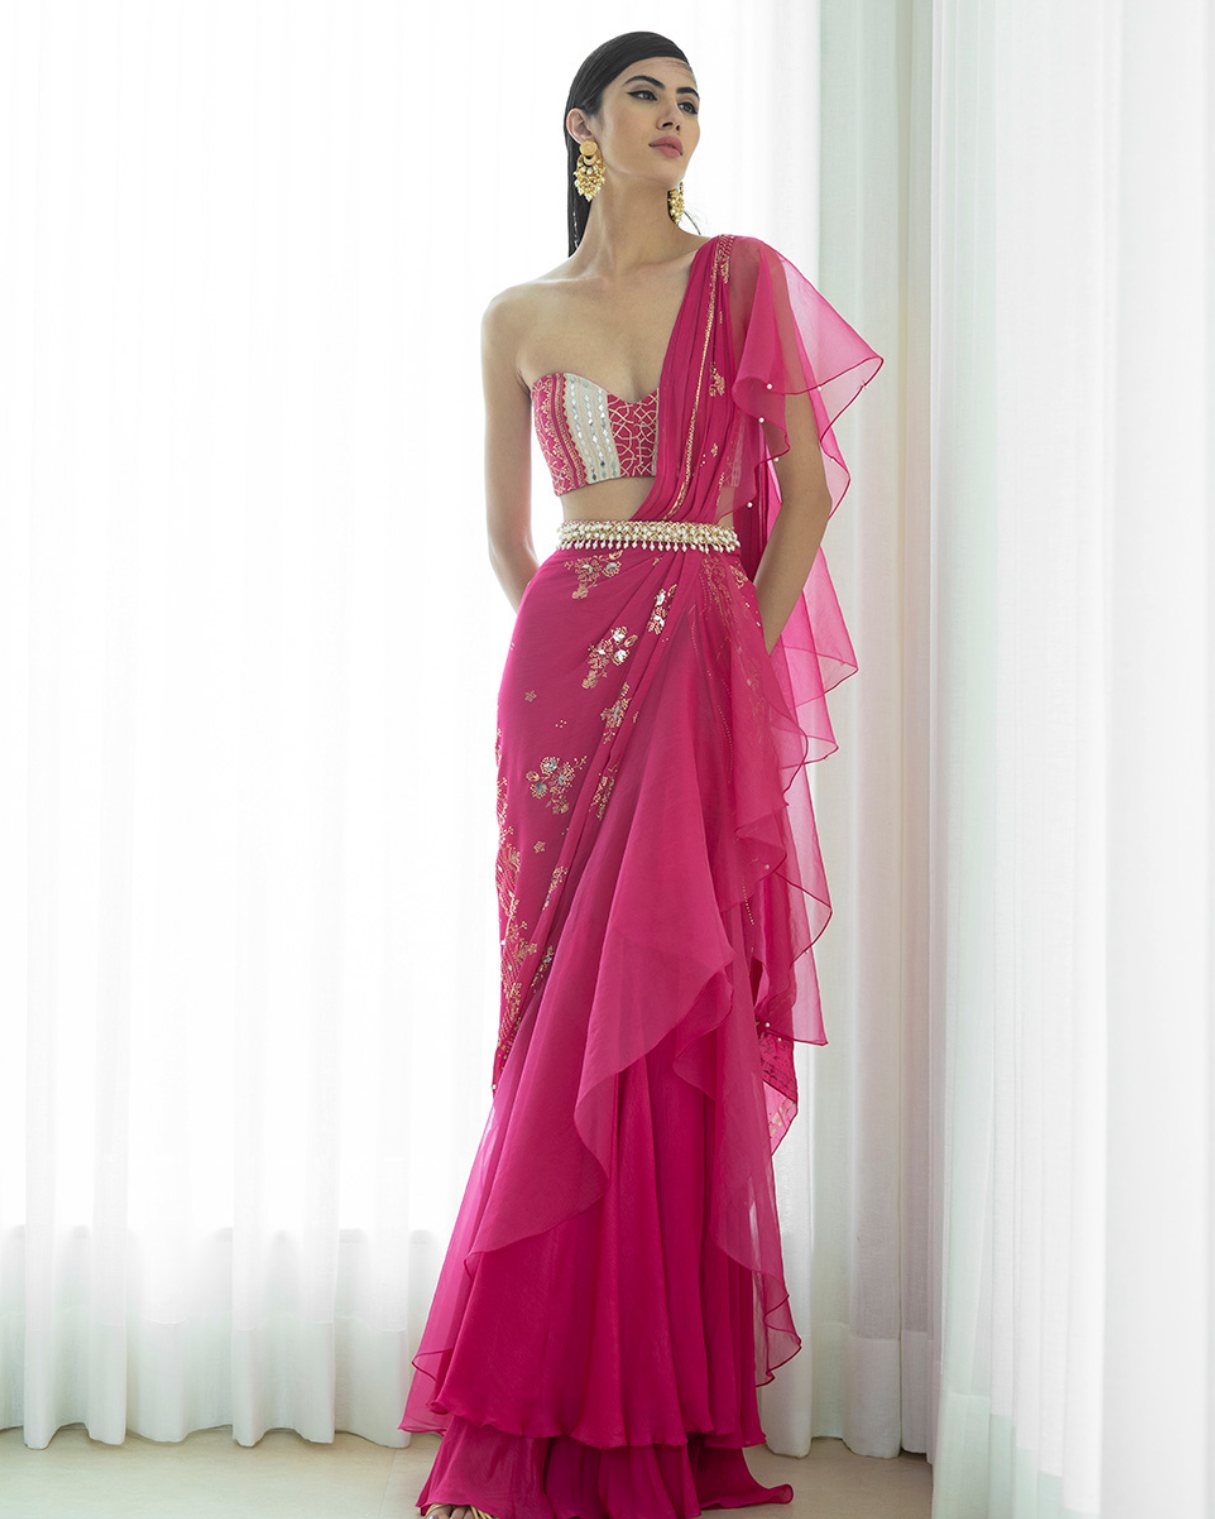 Foil Printed Draped Saree Styles With Bustier And Belt